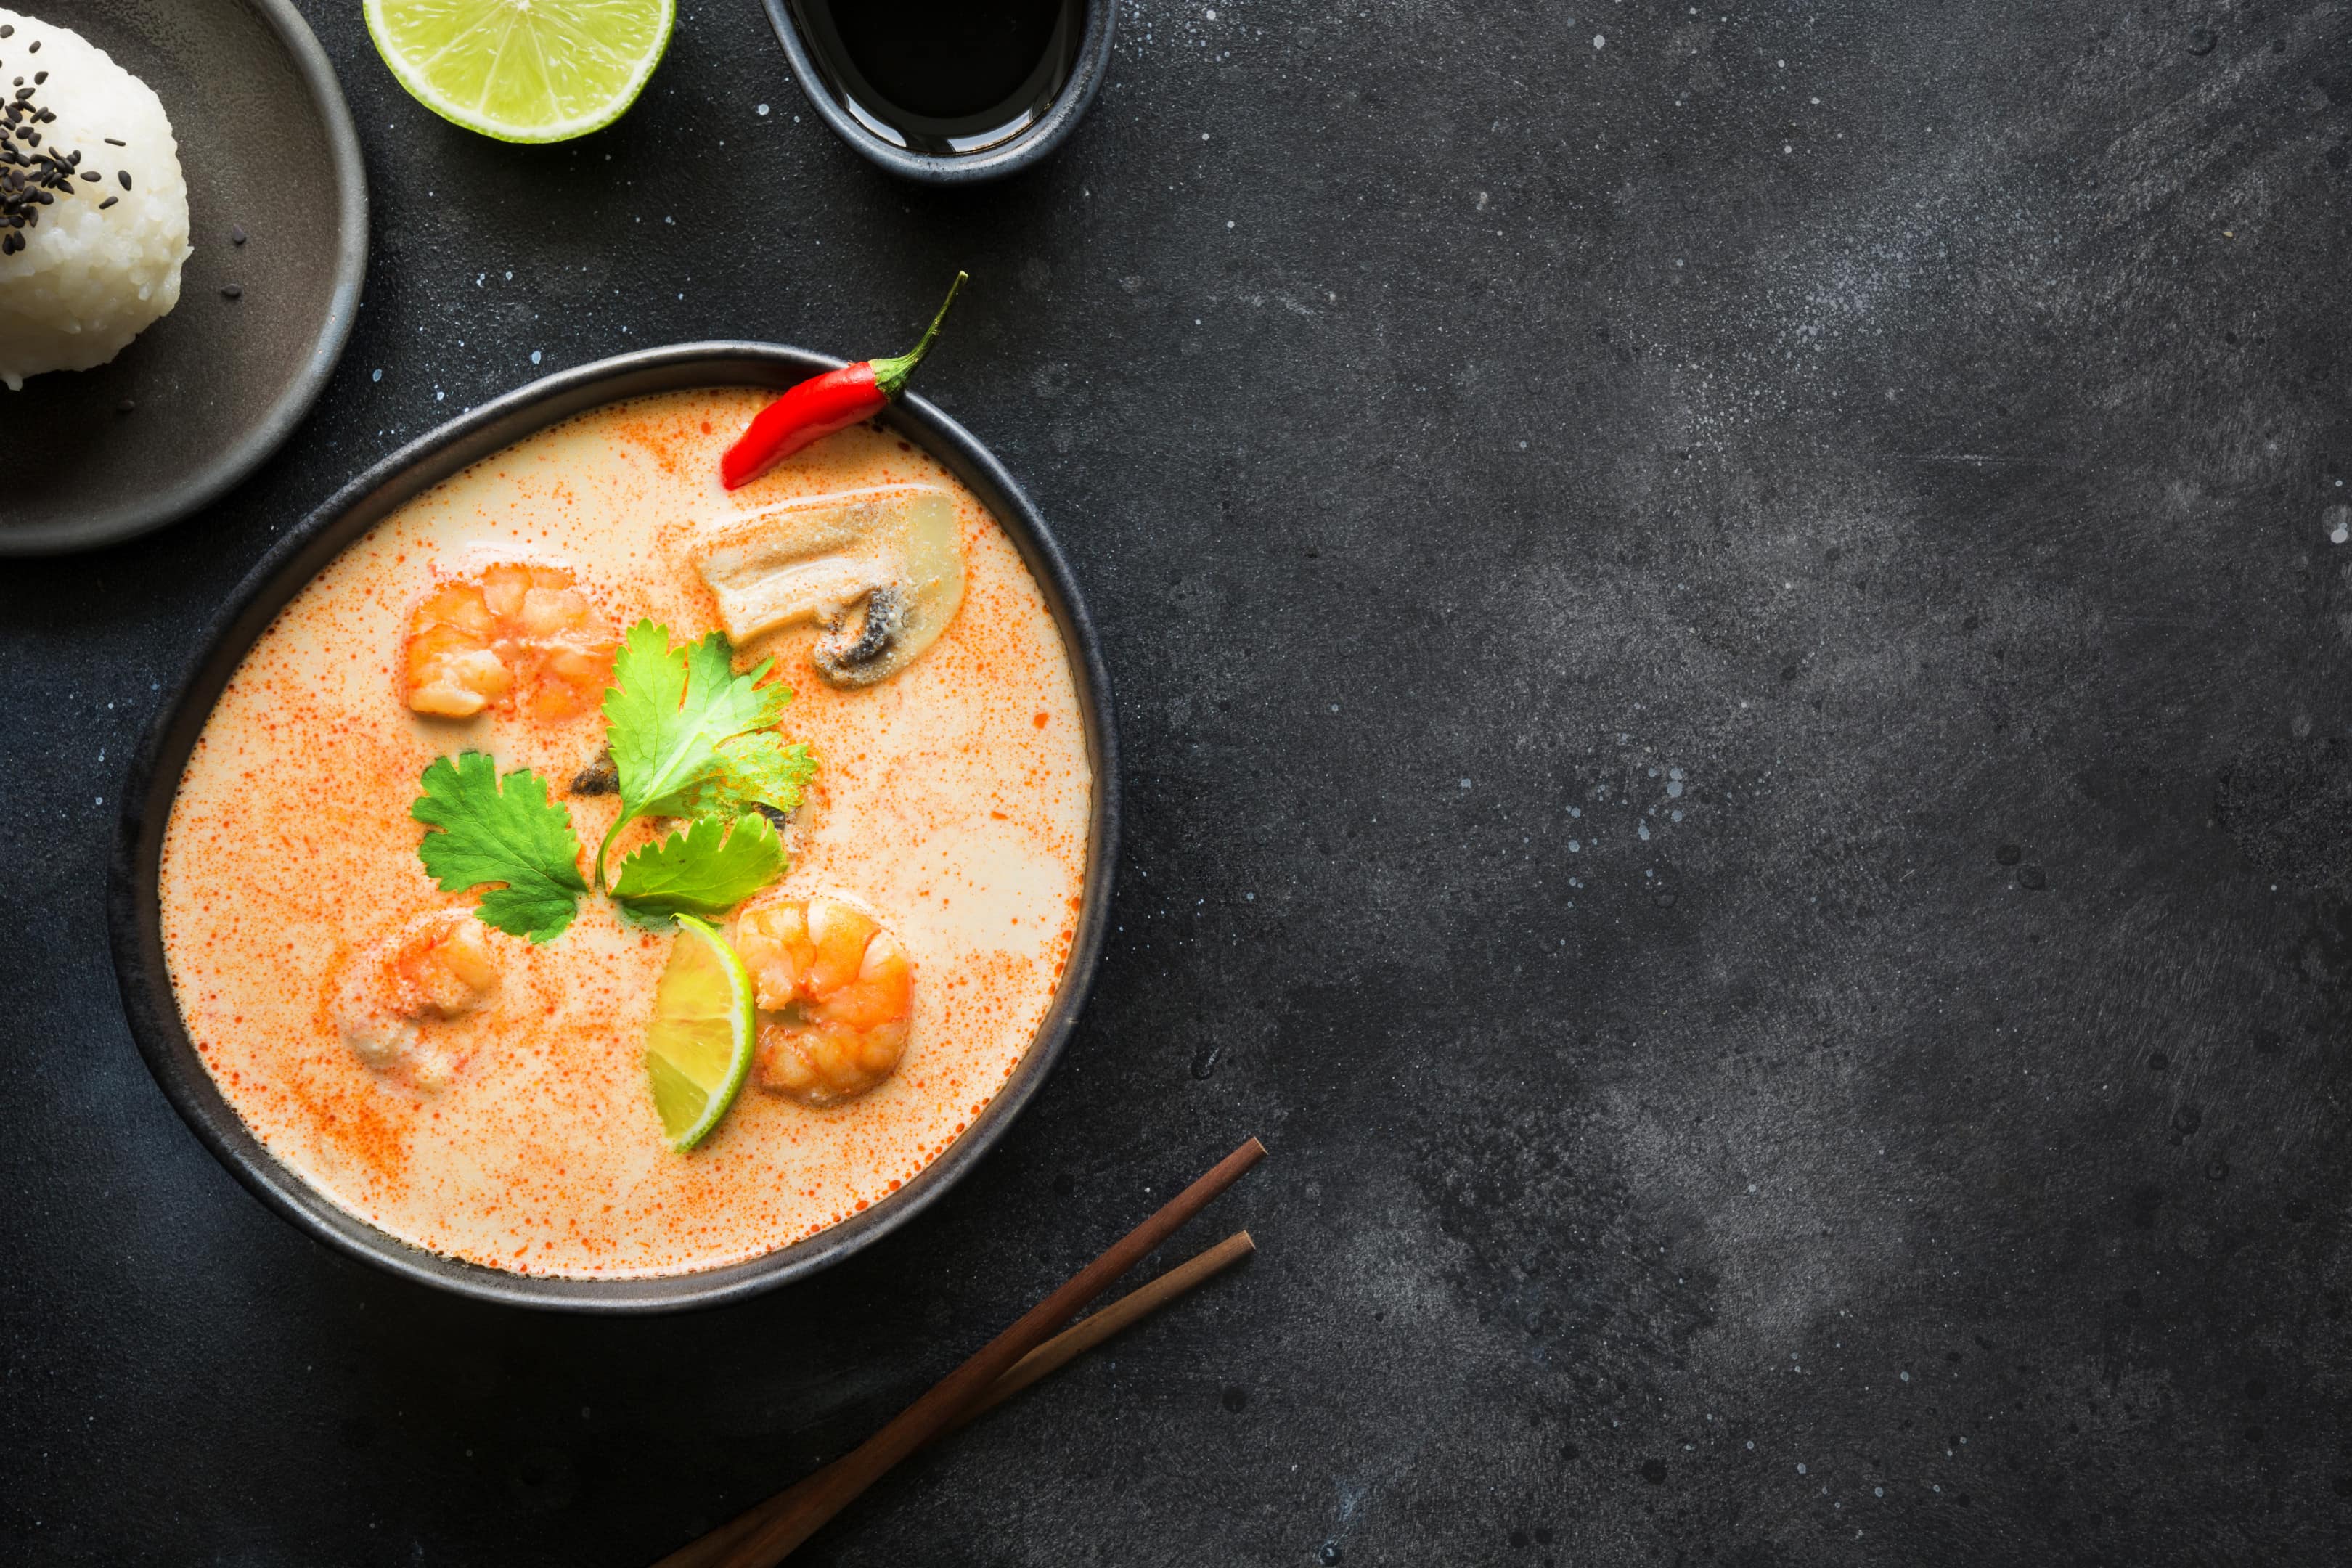 Tom Yum Goong — spicy Thai soup with shrimp